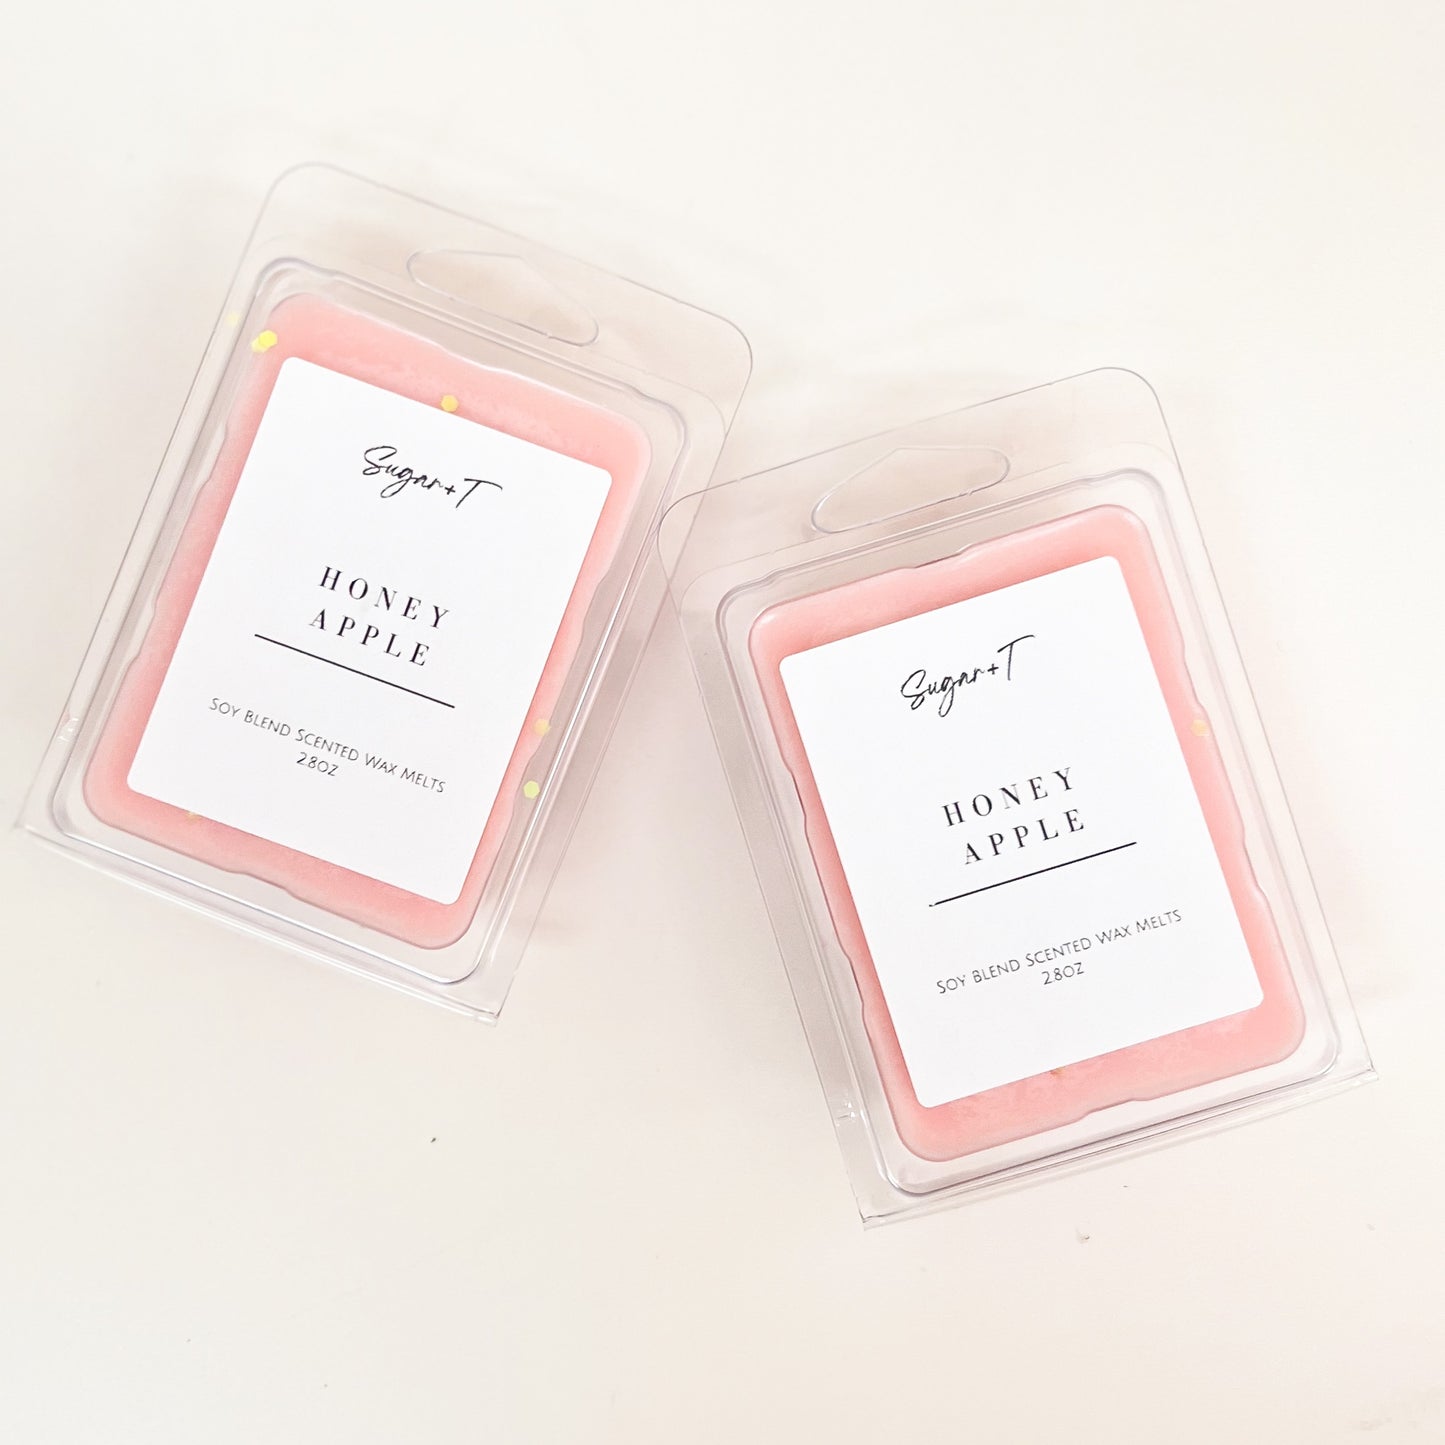 Honey Apple Scented Wax Melts